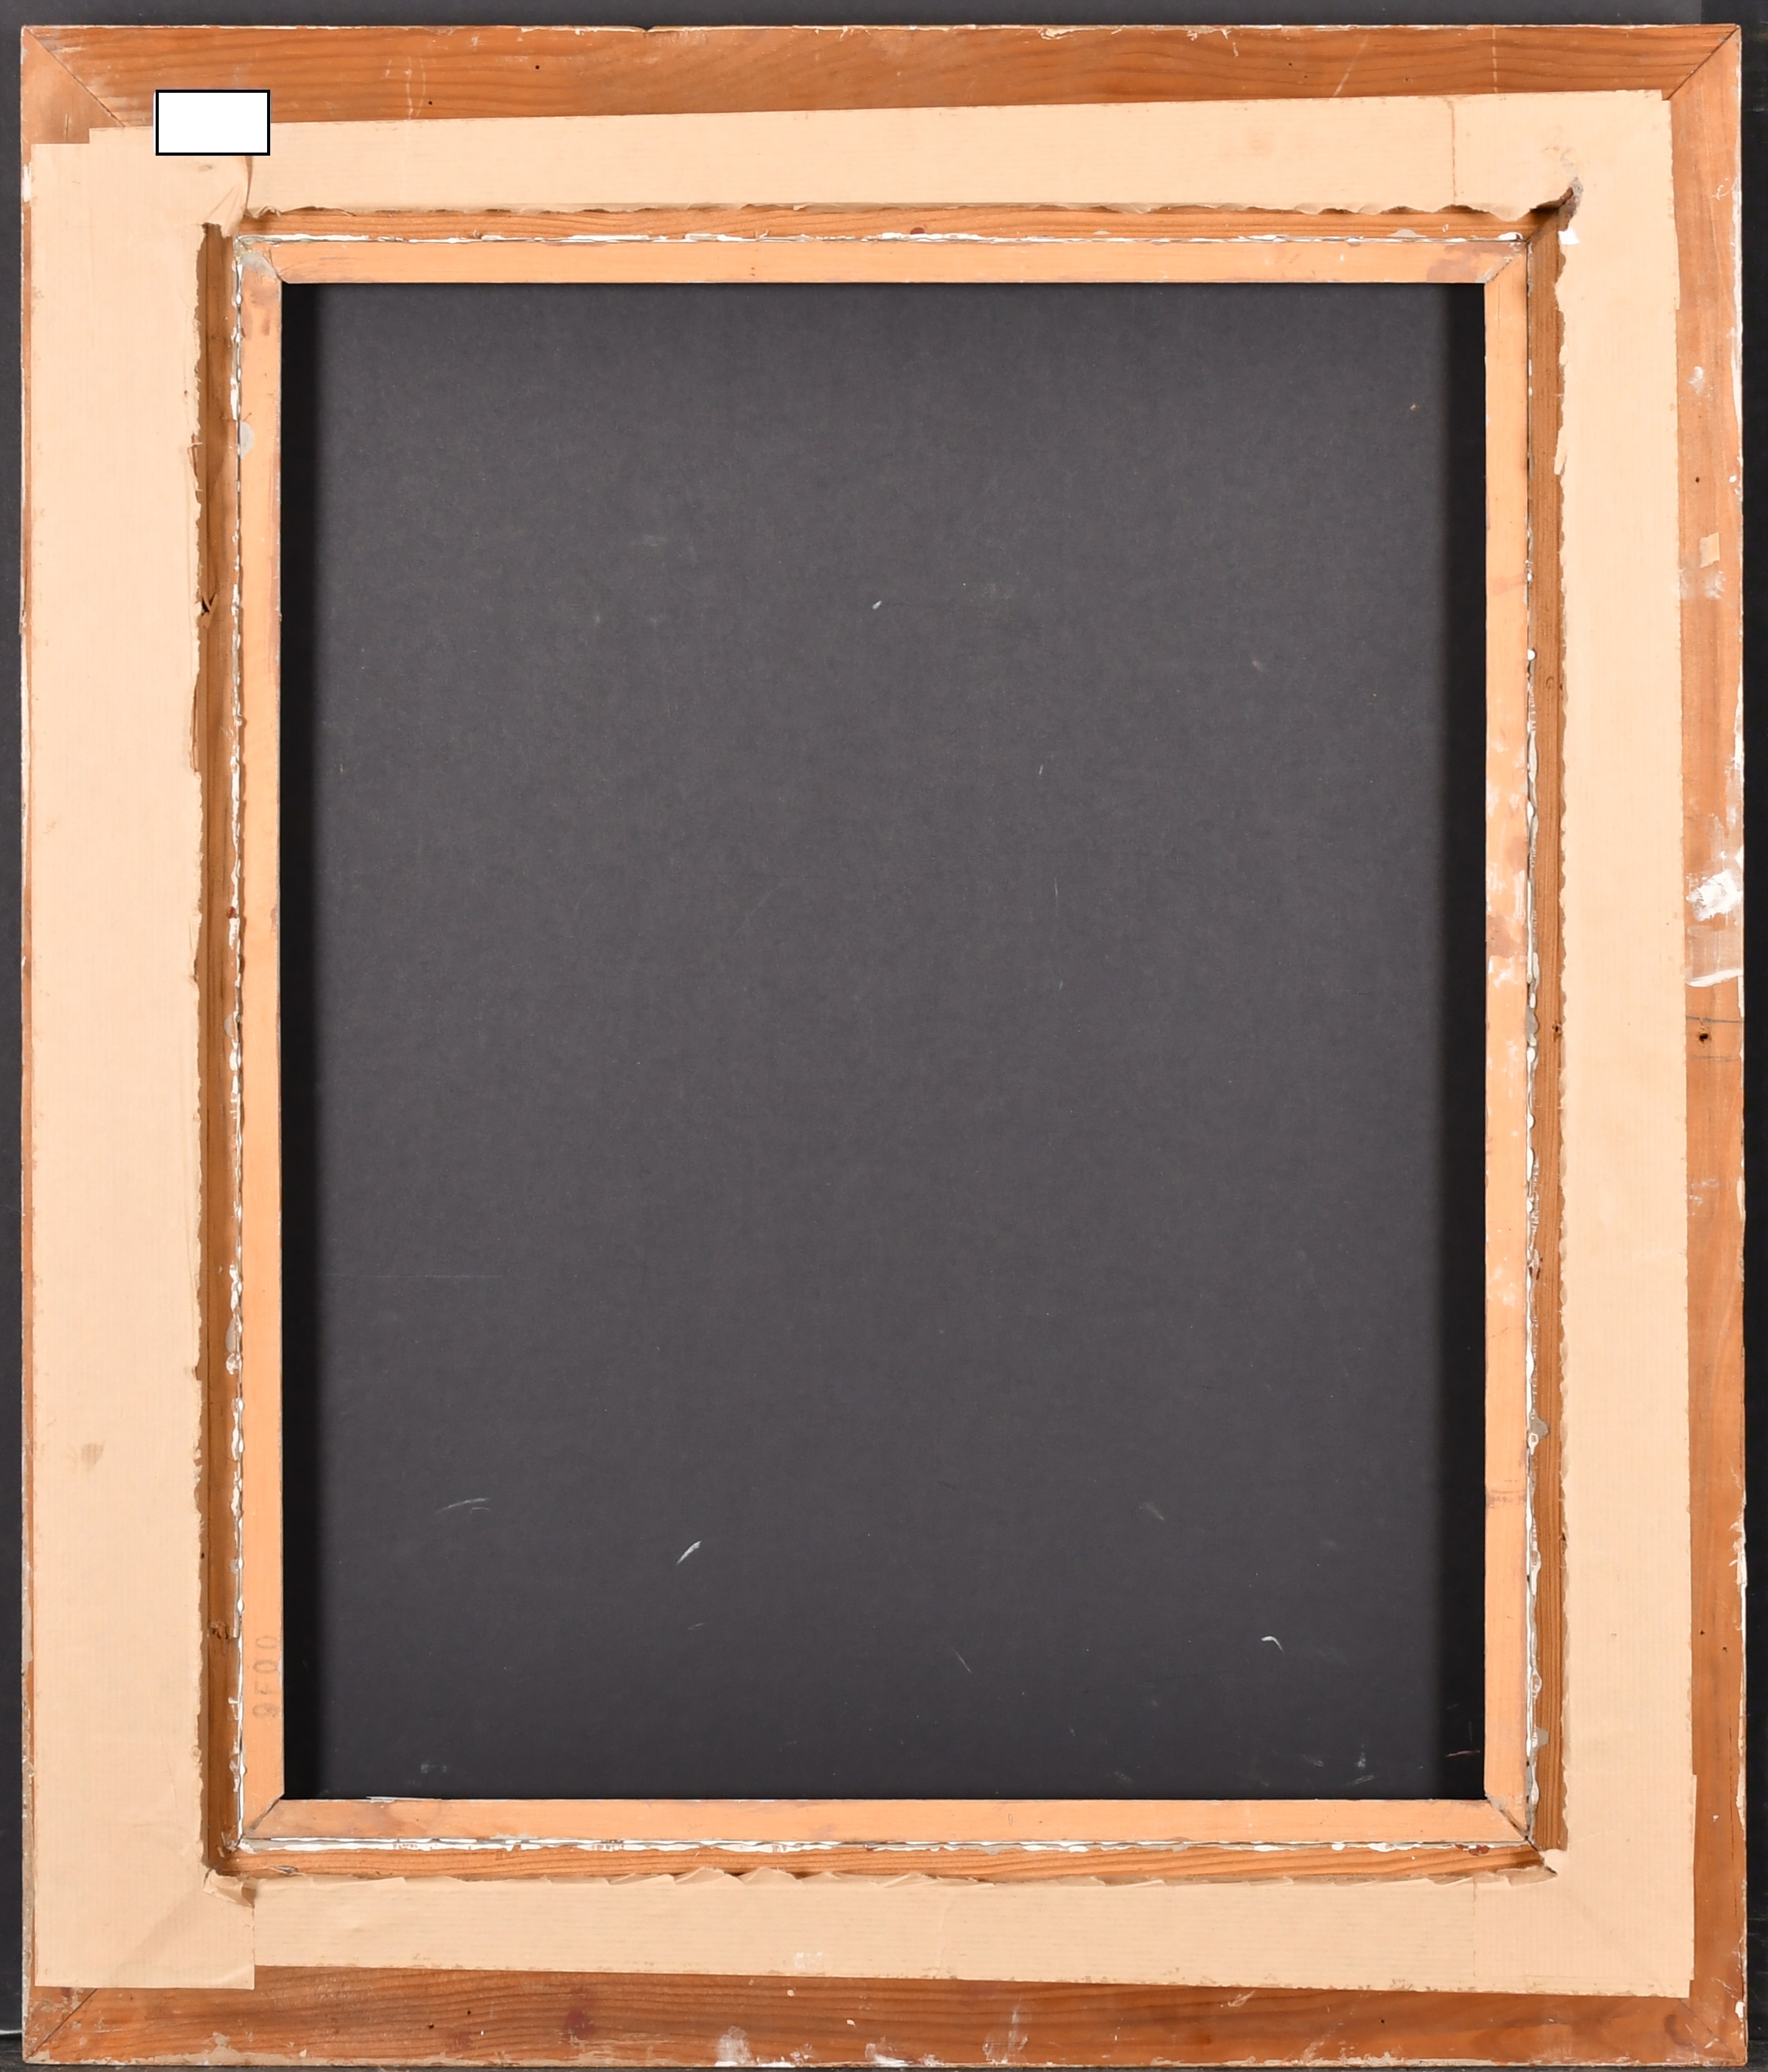 20th Century French School. A Painted Carved Wood Frame, rebate 20.5" x 16.5" (52.1 x 41.9cm) - Image 3 of 3